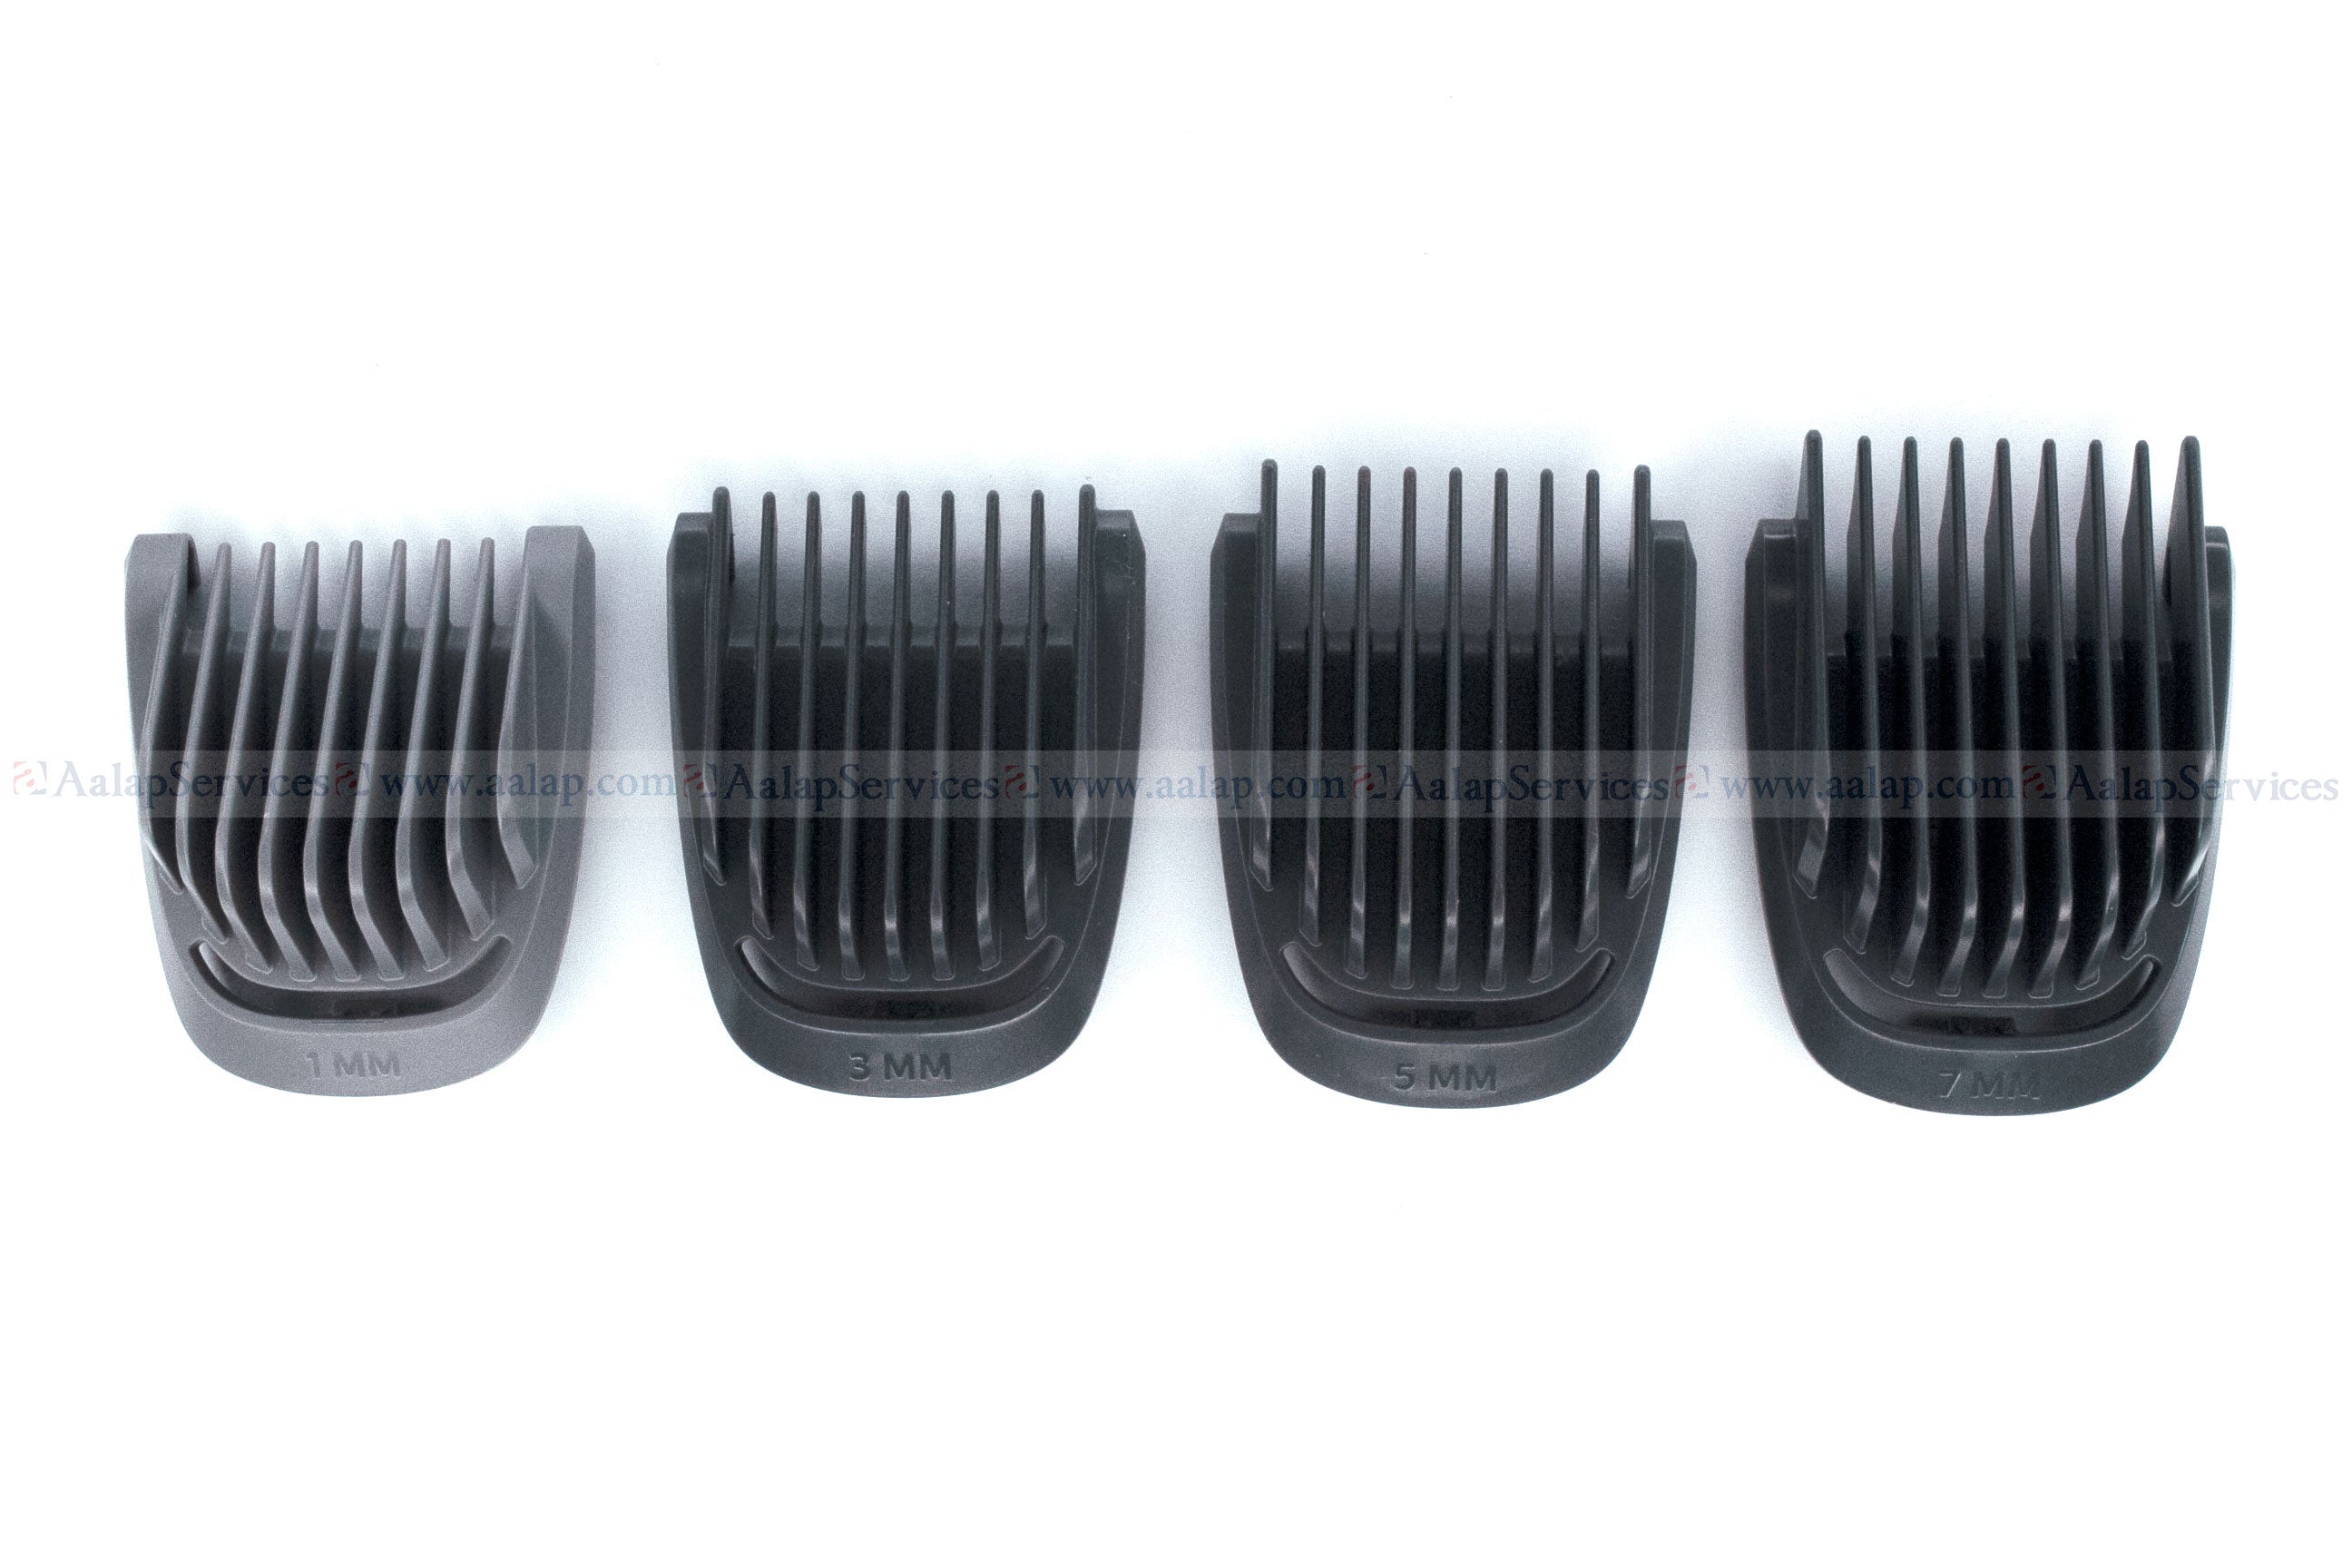 philips trimmer bt1210 combs